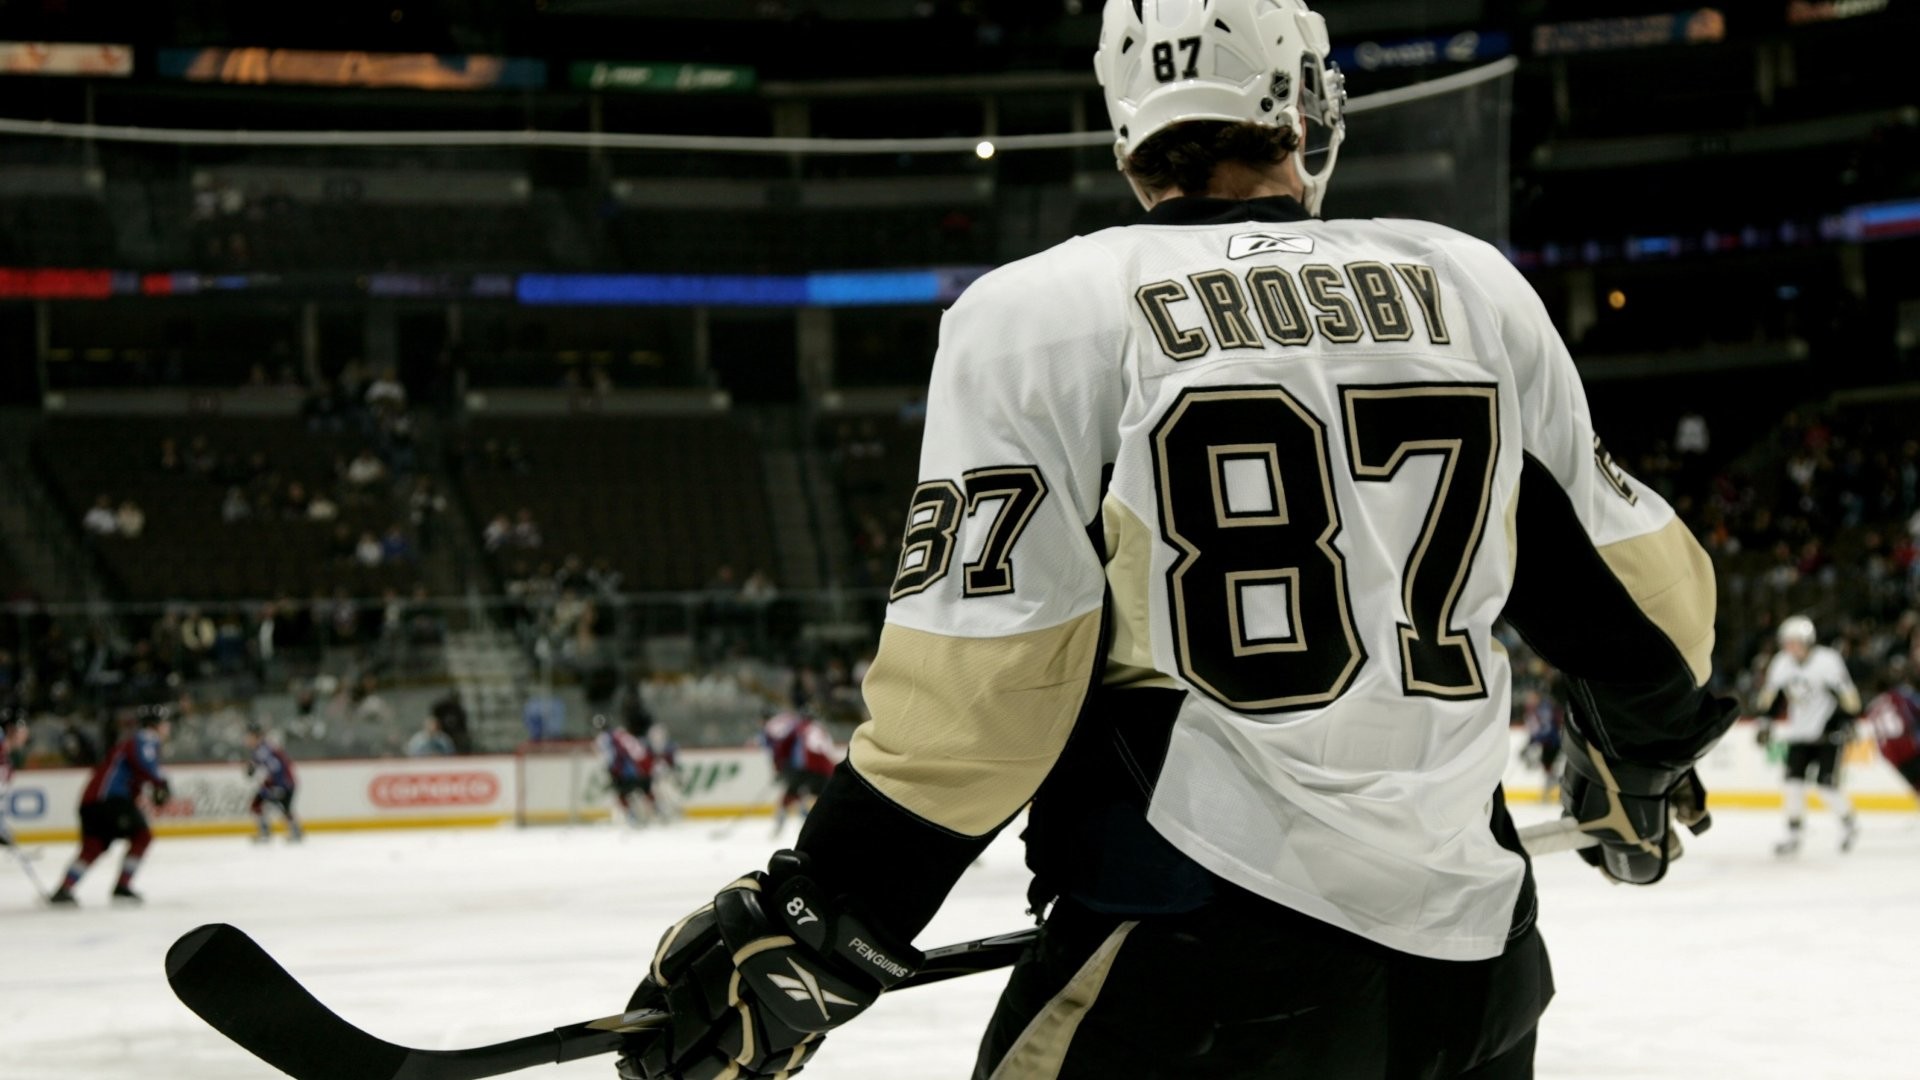 1920x1080 Pittsburgh Penguins Backgrounds.